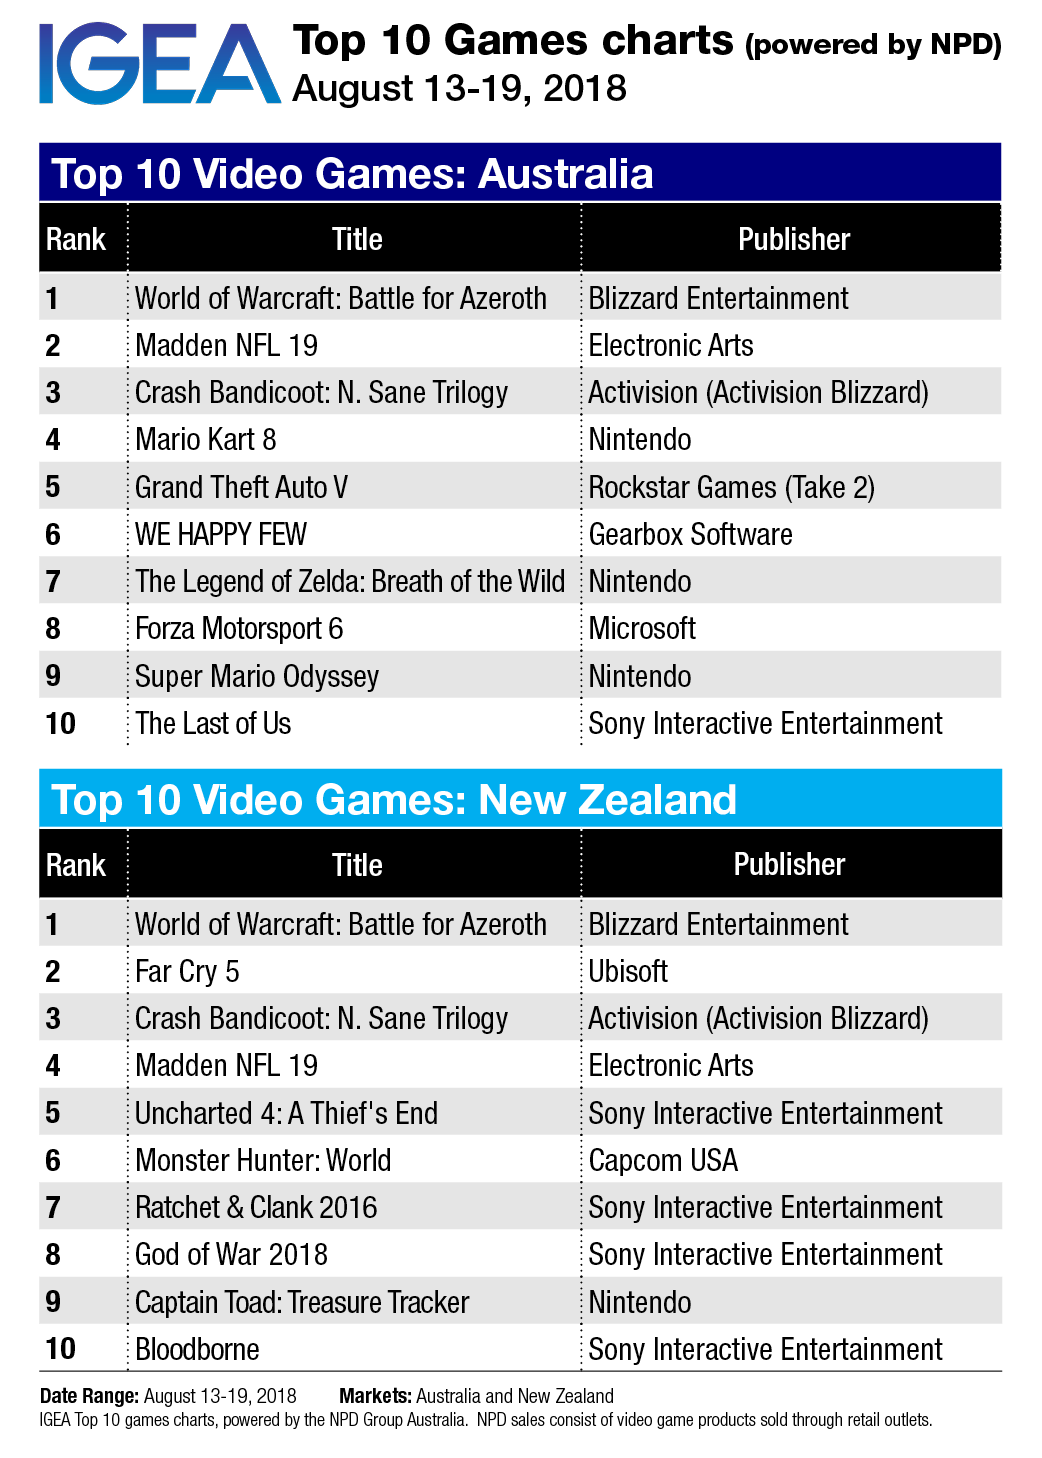 Top 10 Game Charts: World of Warcraft Battle of Azeroth debuts at #1